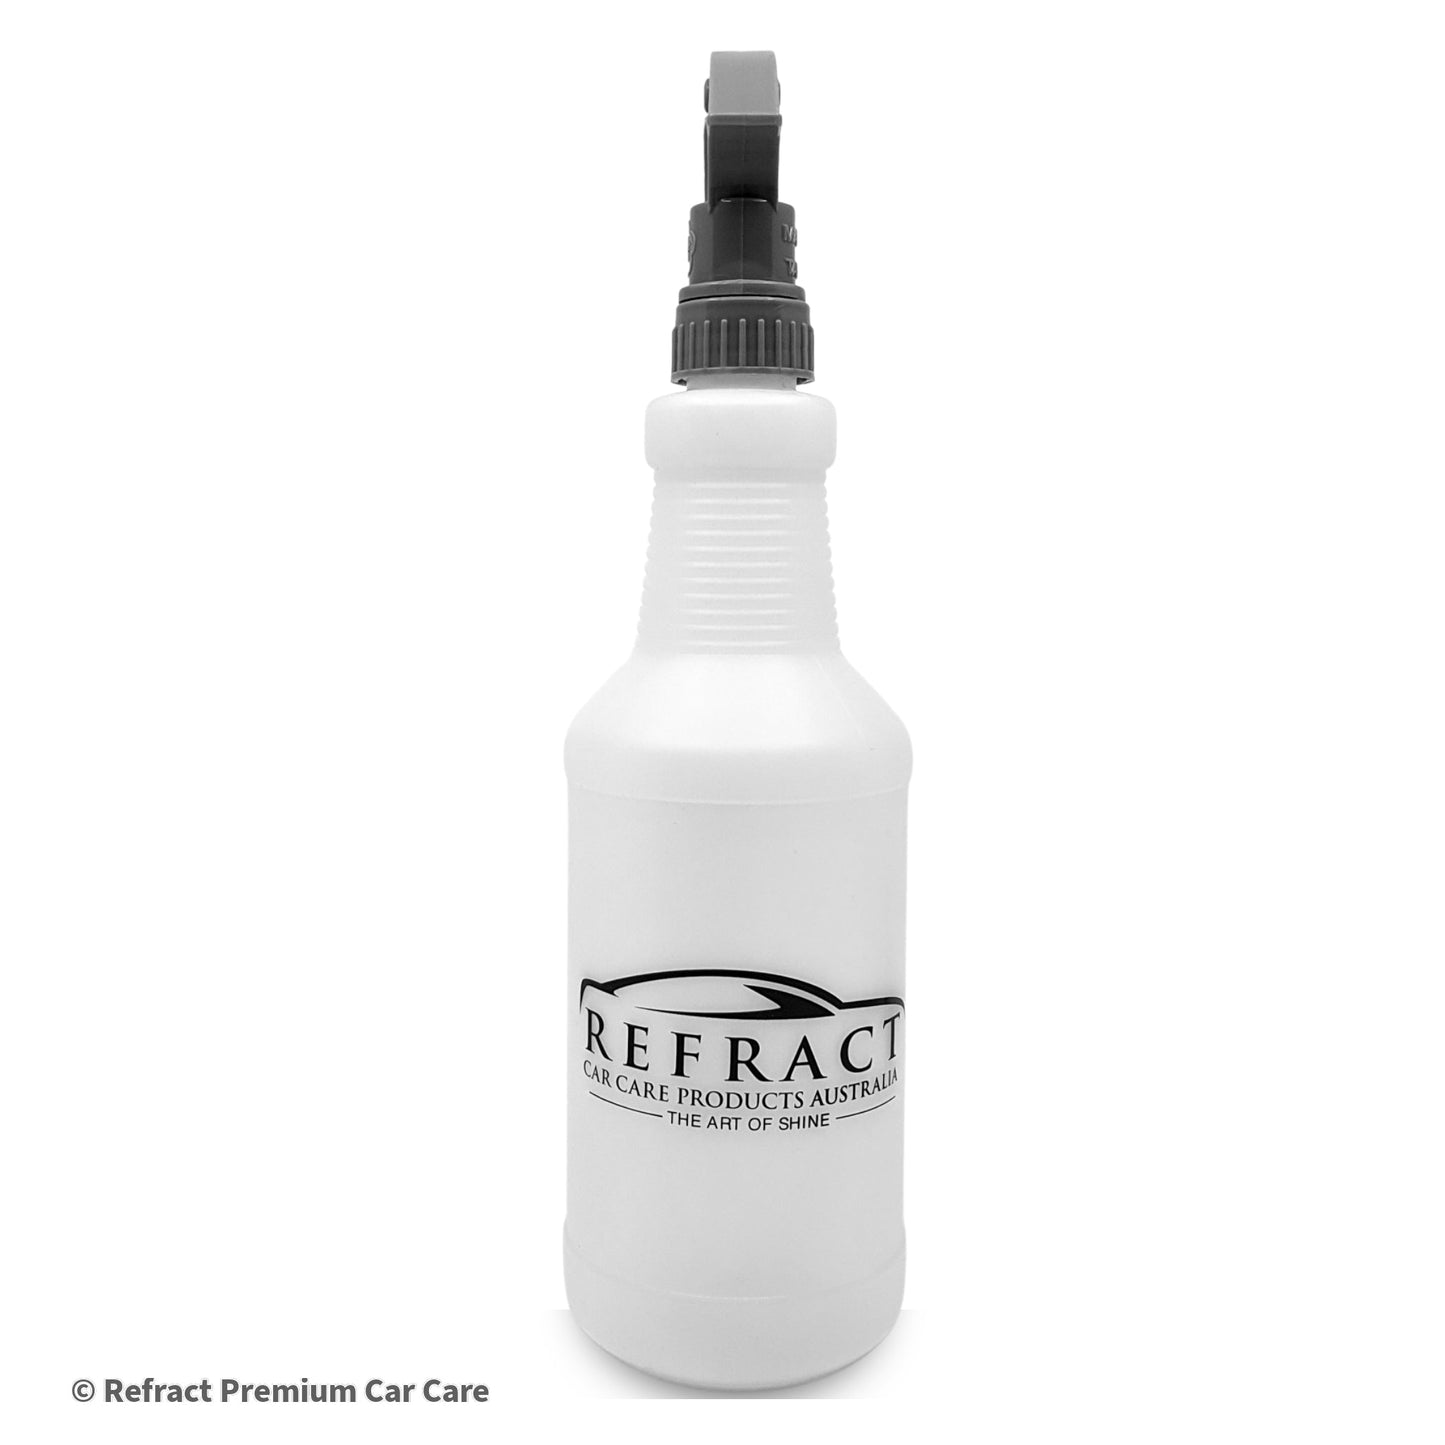 Refract Premium Car Care Products REFRACT Spray Bottle - Chemical Resistant Nitrile Seals $8.95